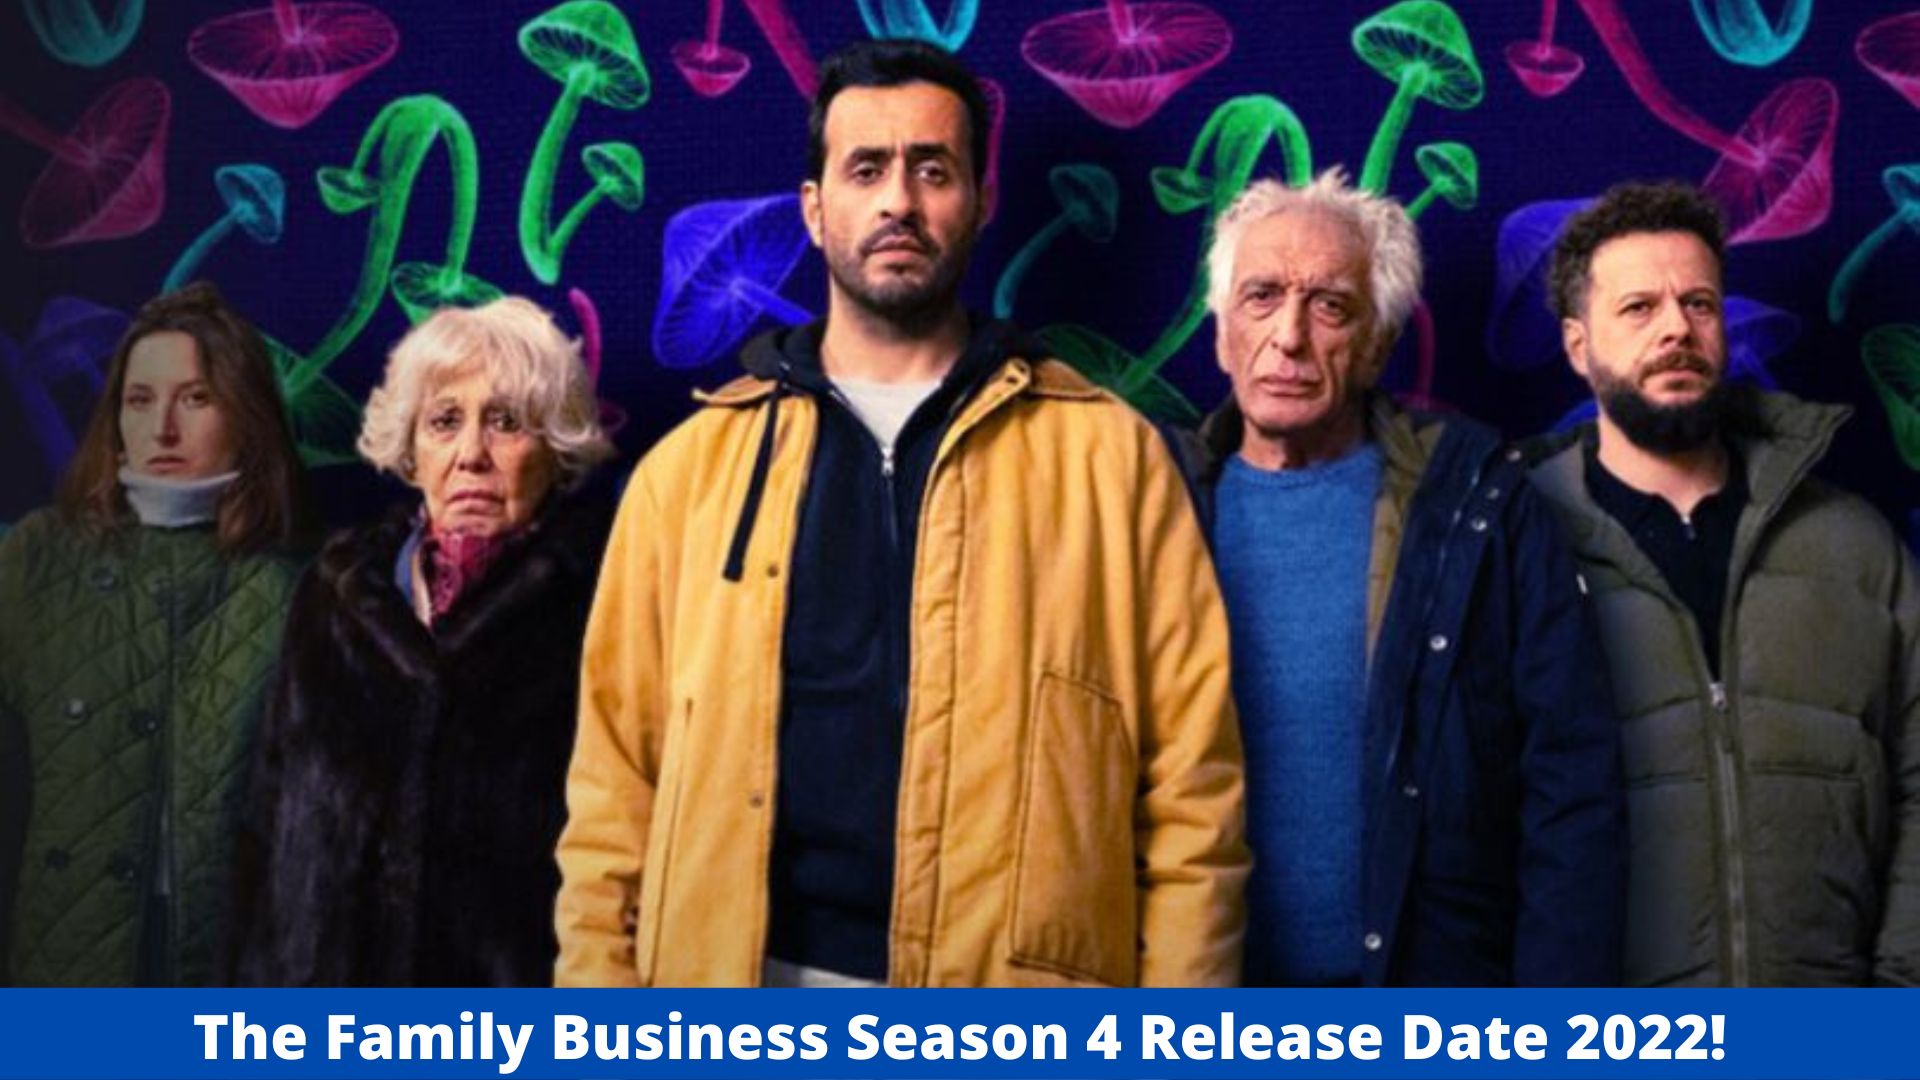 The Family Business Season 4 Release Date 2022!